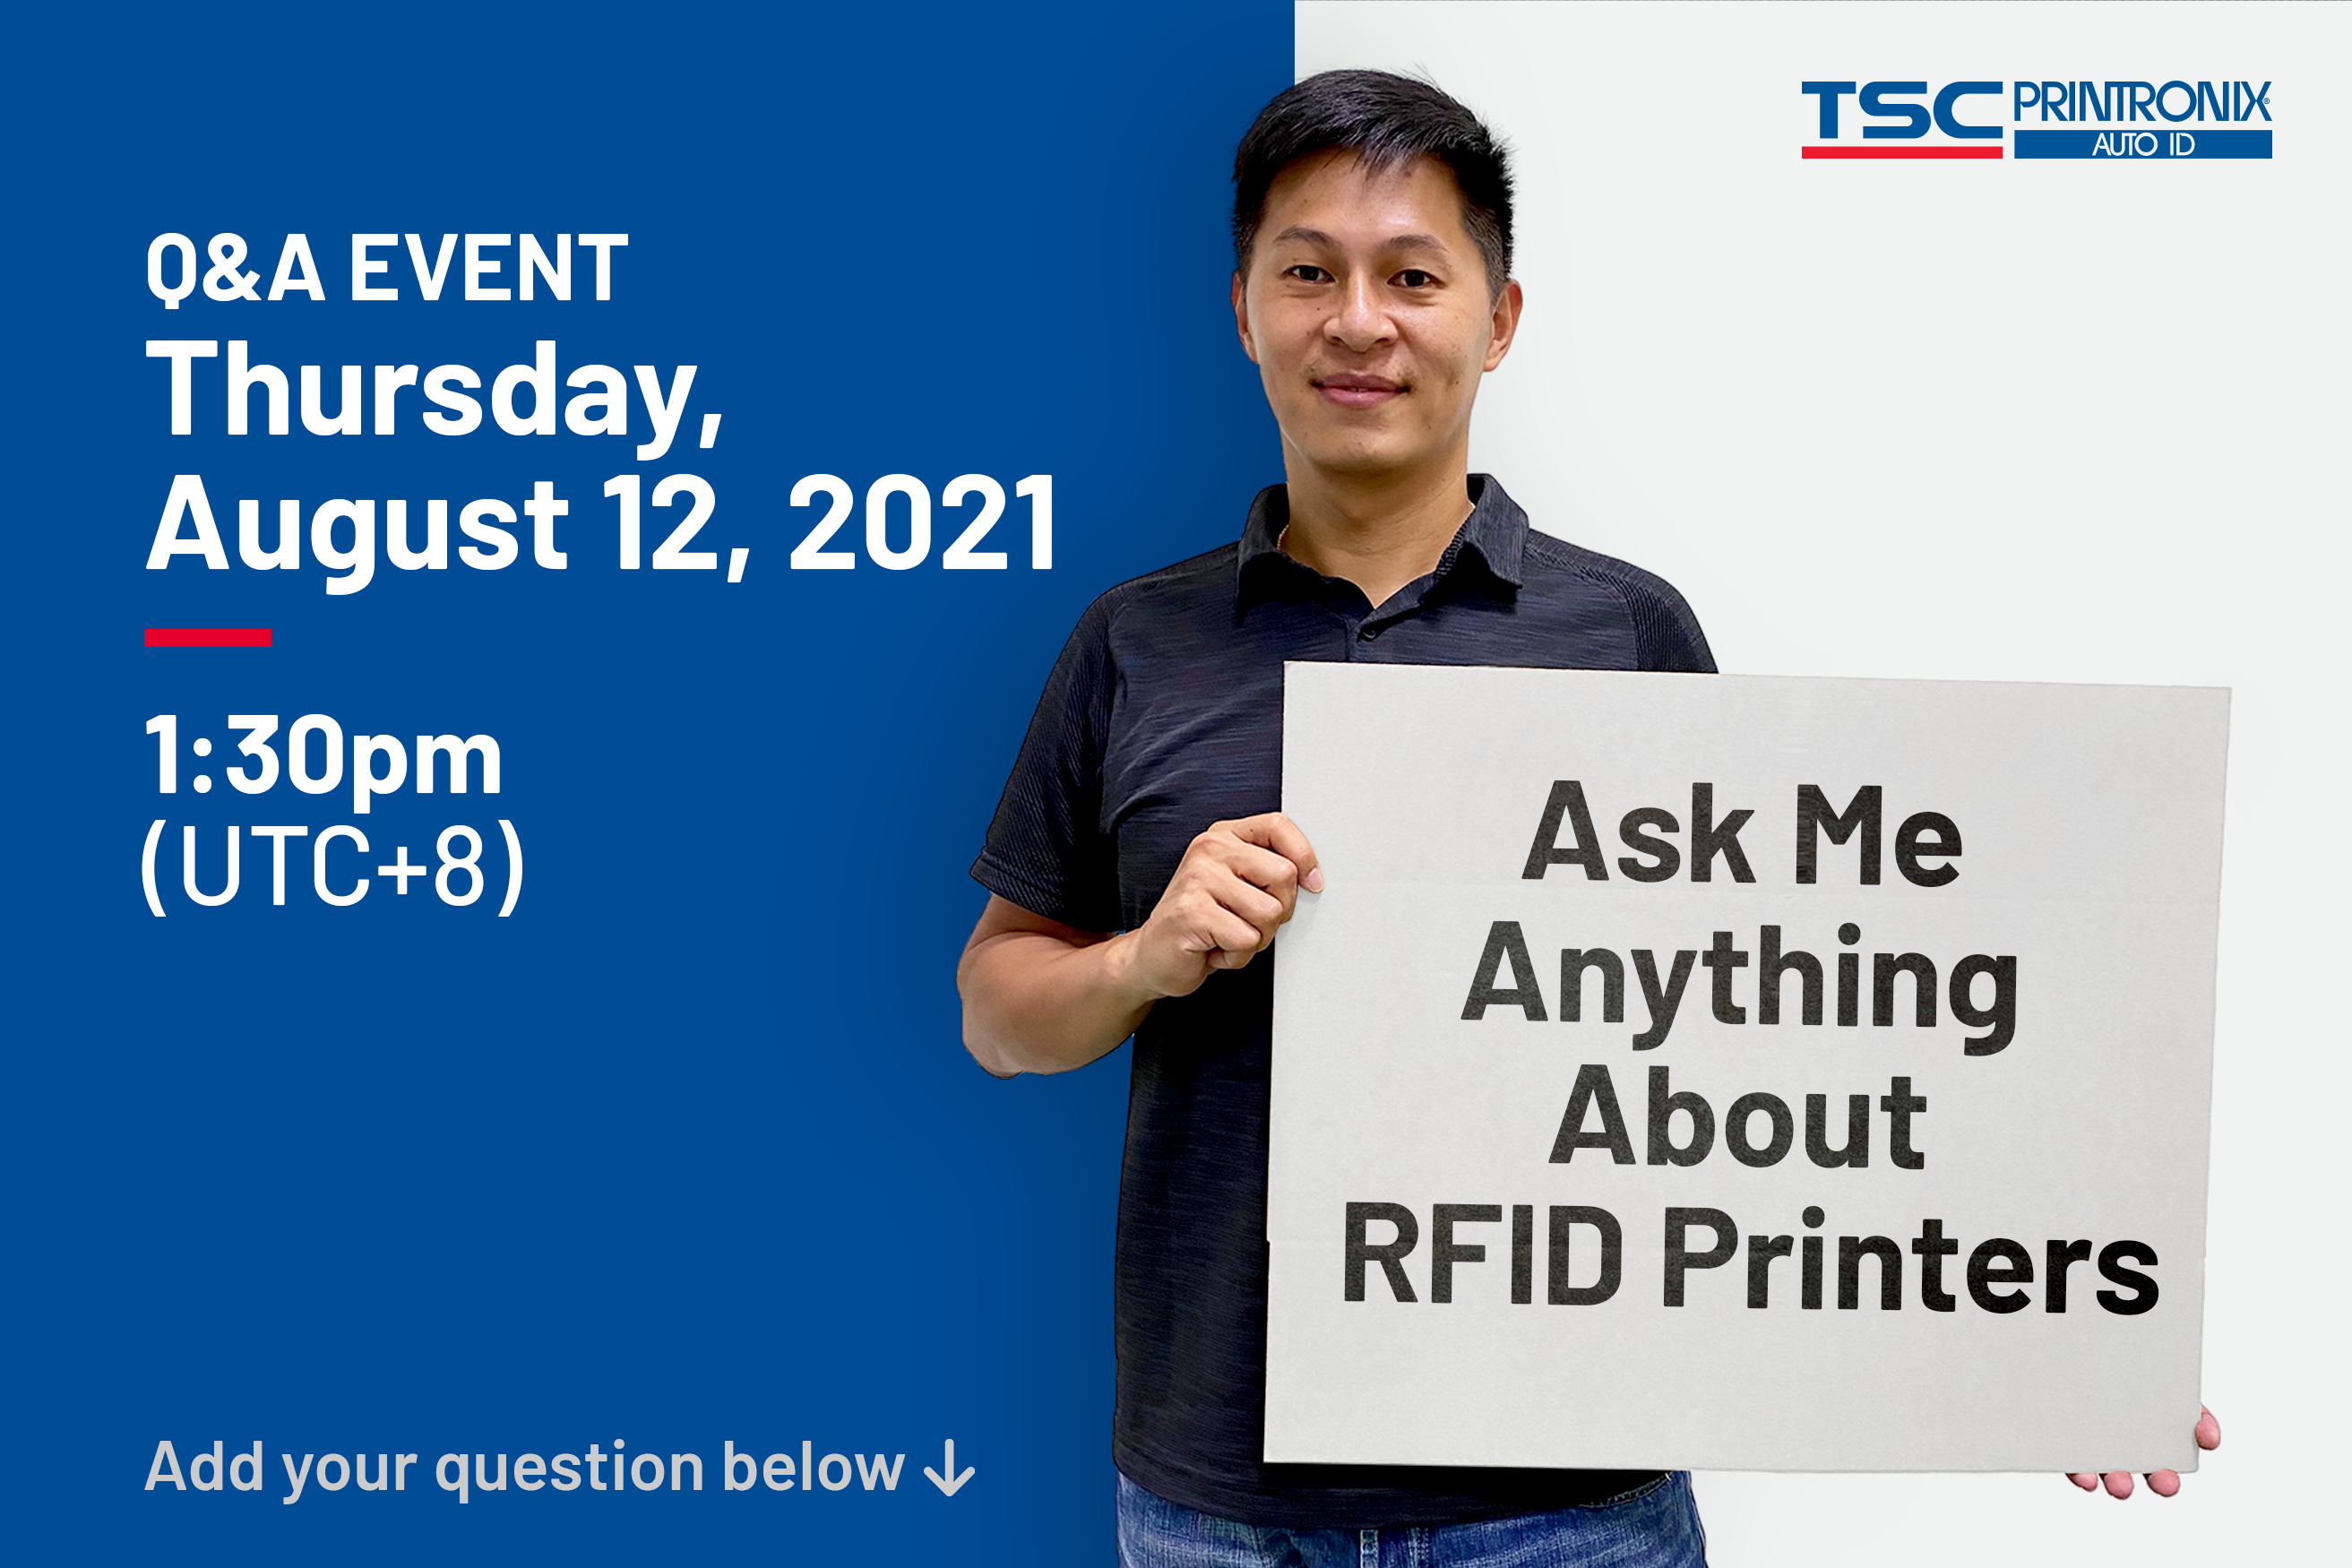 Ask Me Anything About RFID Printers